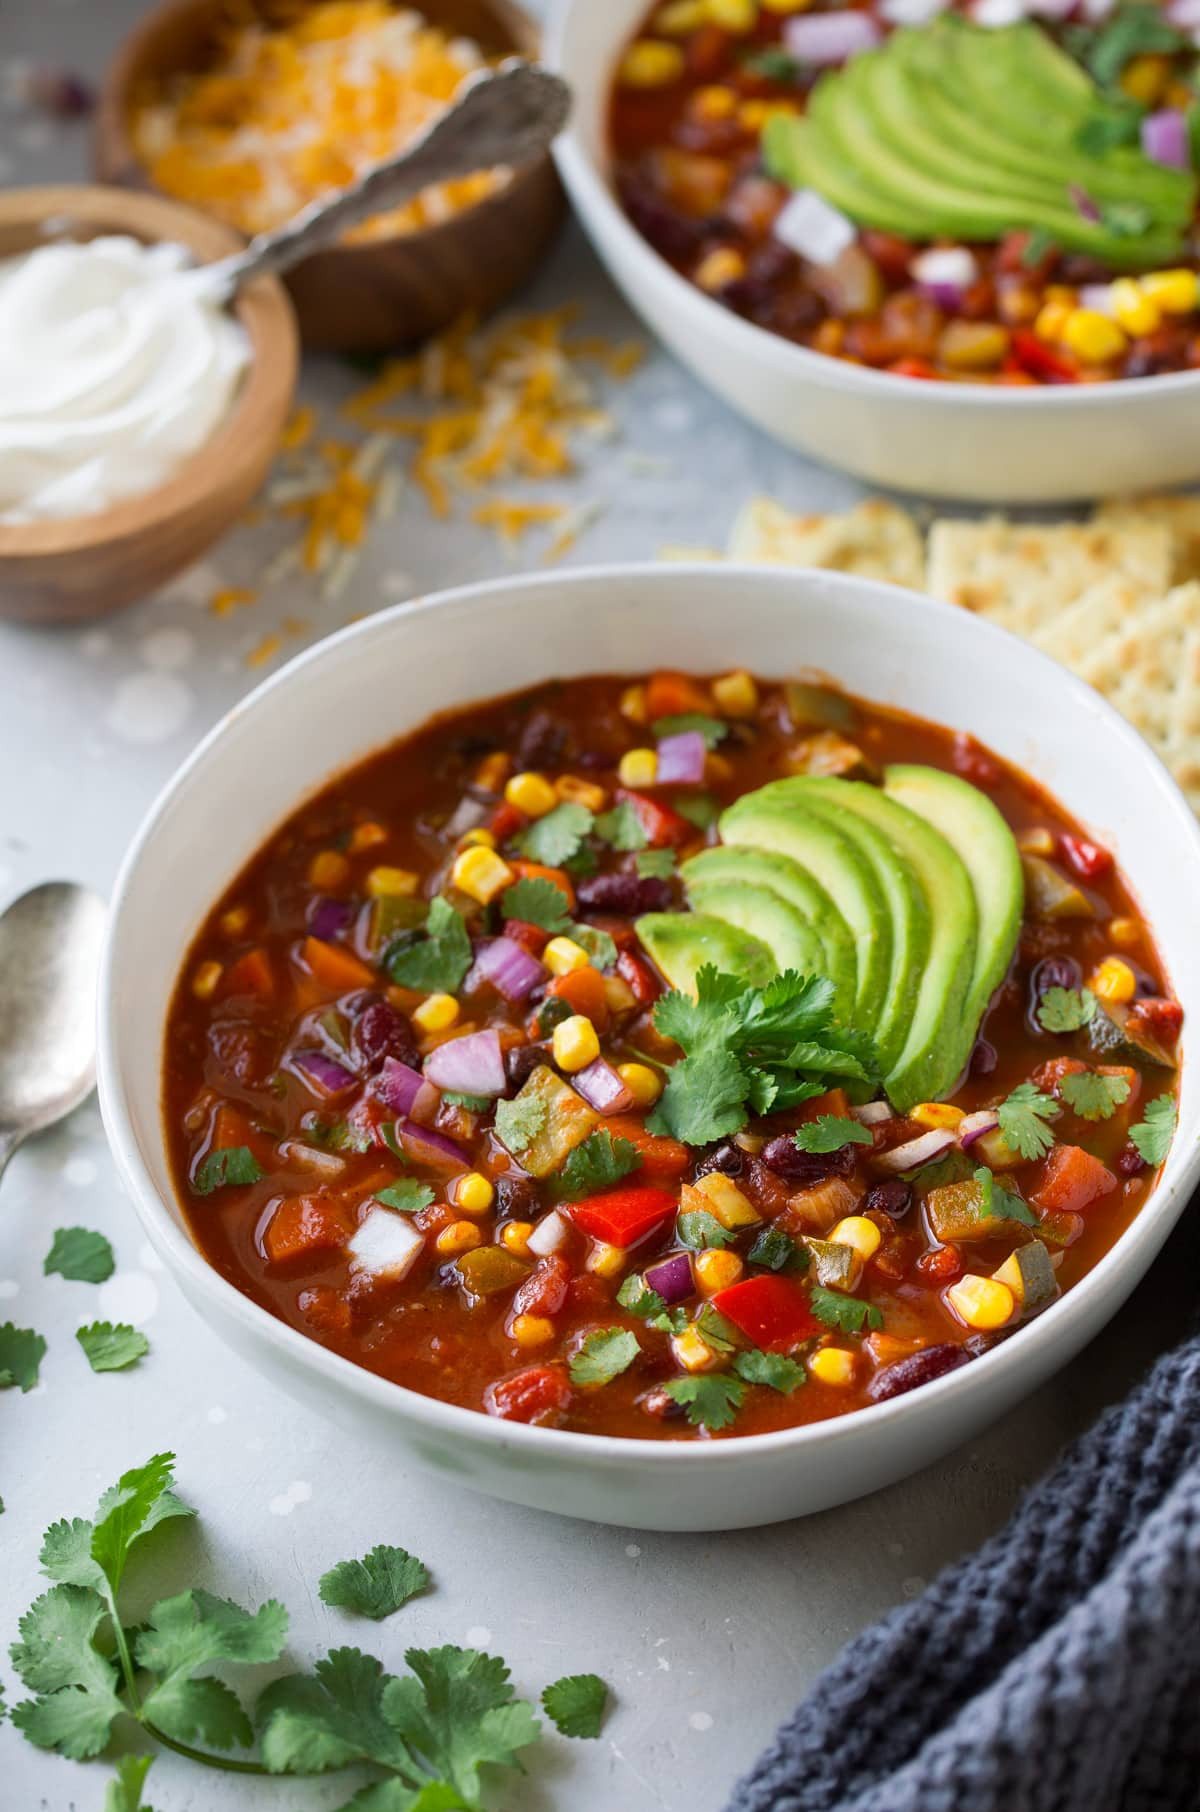 Is Vegetarian Chili Healthy
 Ve arian Chili Healthy and Packed with Flavor